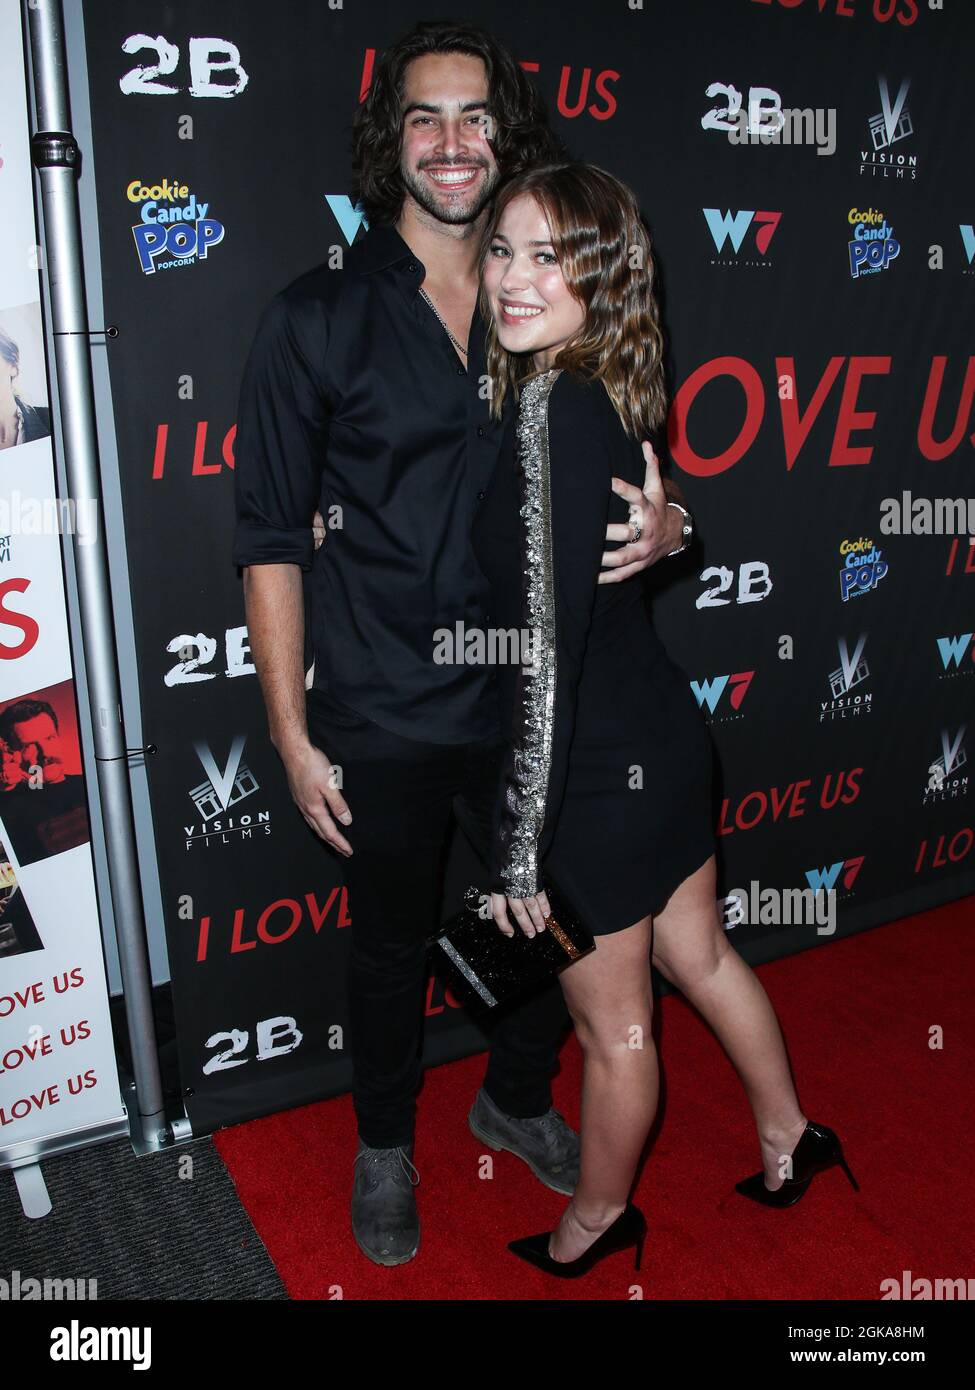 Hollywood, United States. 13th Sep, 2021. HOLLYWOOD, LOS ANGELES, CALIFORNIA, USA - SEPTEMBER 13: James Robert Brookes and girlfriend/actress Jasper Polish arrive at the Los Angeles Premiere Of Vision Films' 'I Love Us' held at the Harmony Gold Theater on September 13, 2021 in Hollywood, Los Angeles, California, United States. (Photo by Xavier Collin/Image Press Agency) Credit: Image Press Agency/Alamy Live News Stock Photo